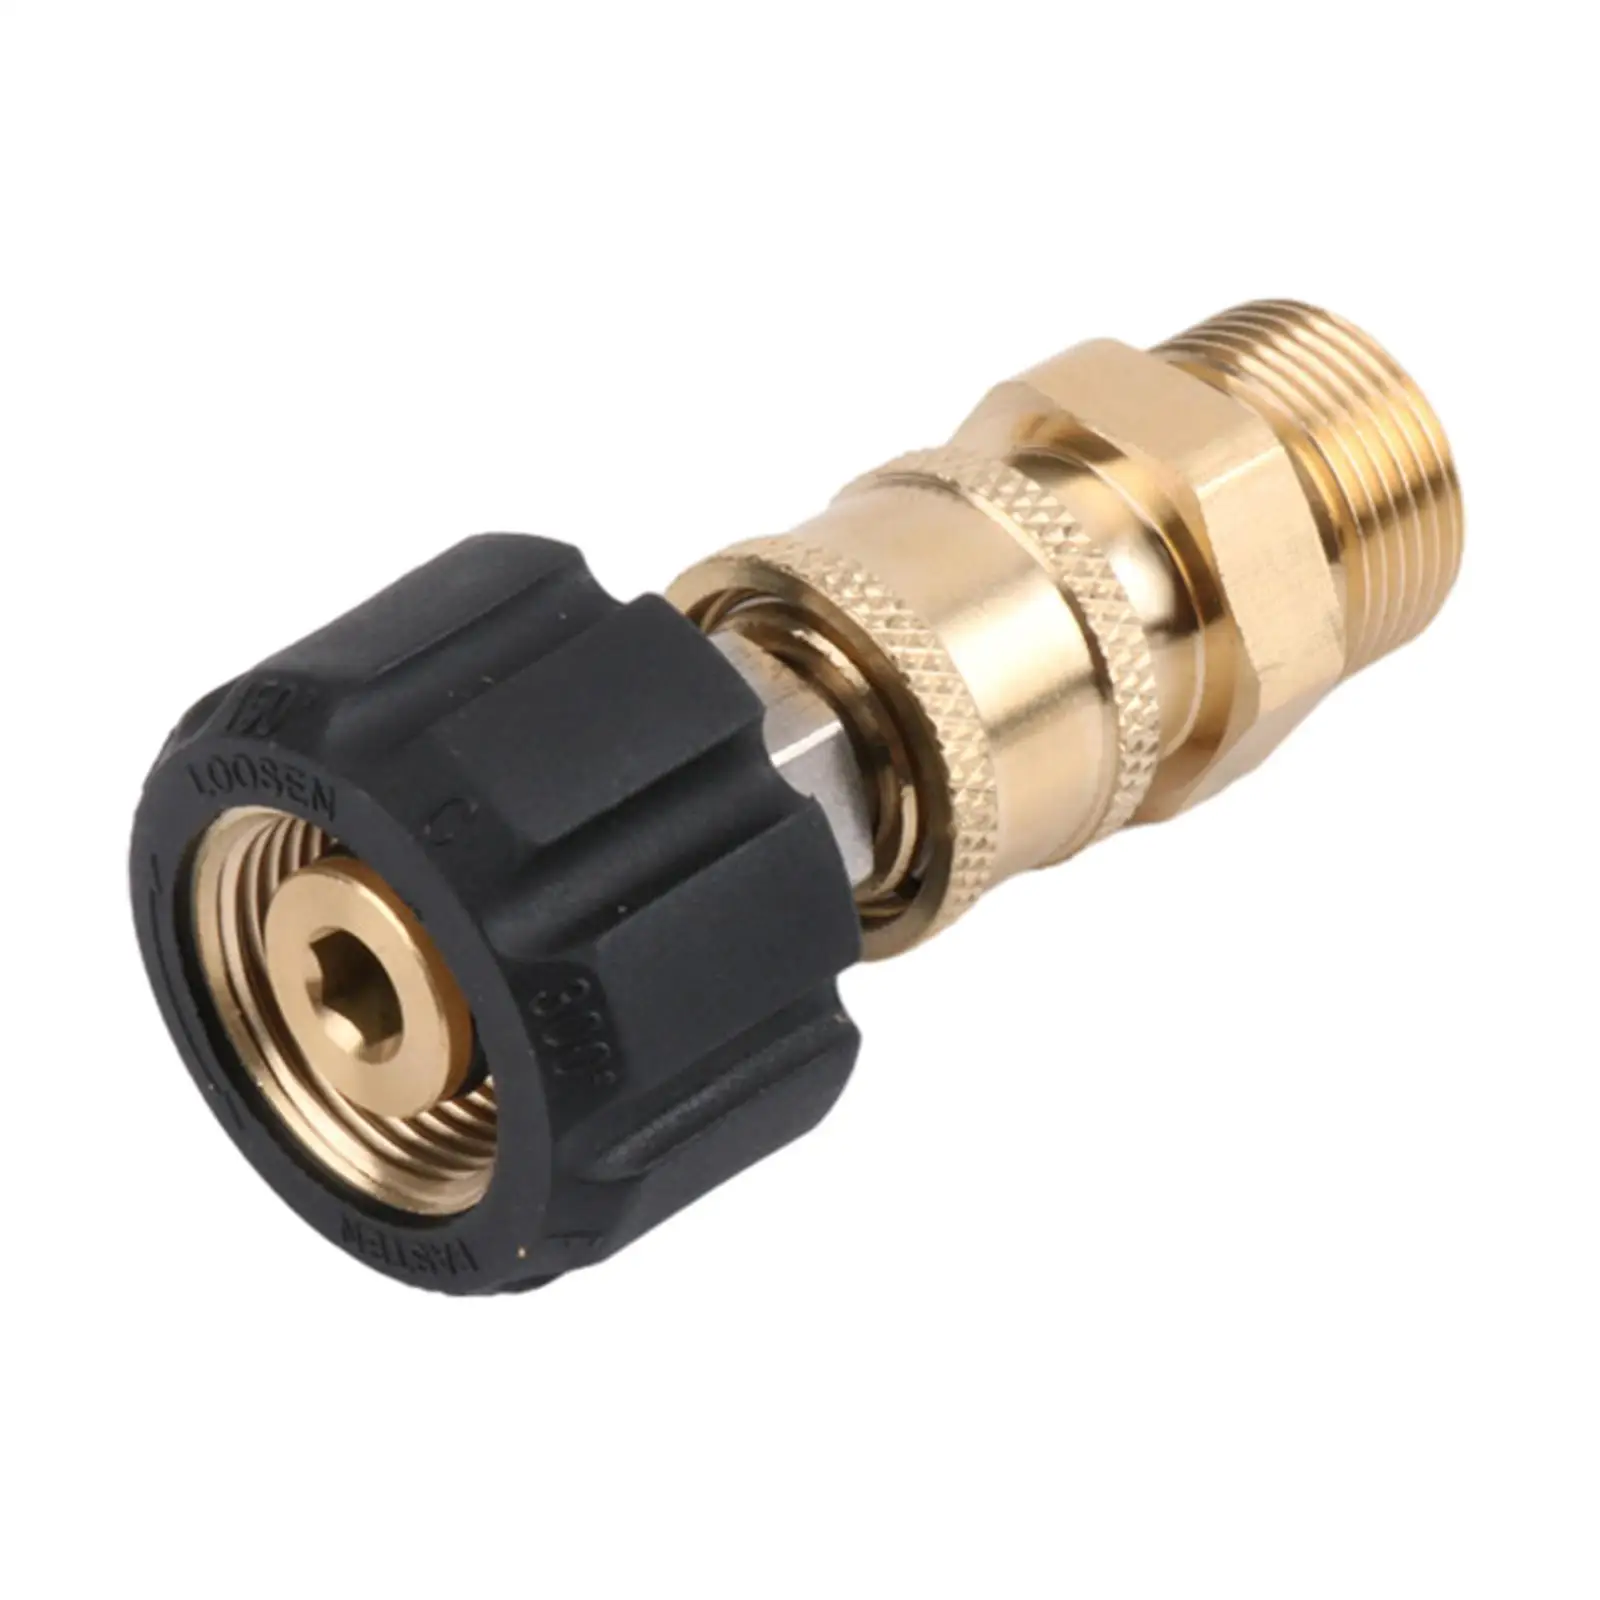 Pressure Washer Adapter Household Professional for Pressure Washer Supplies